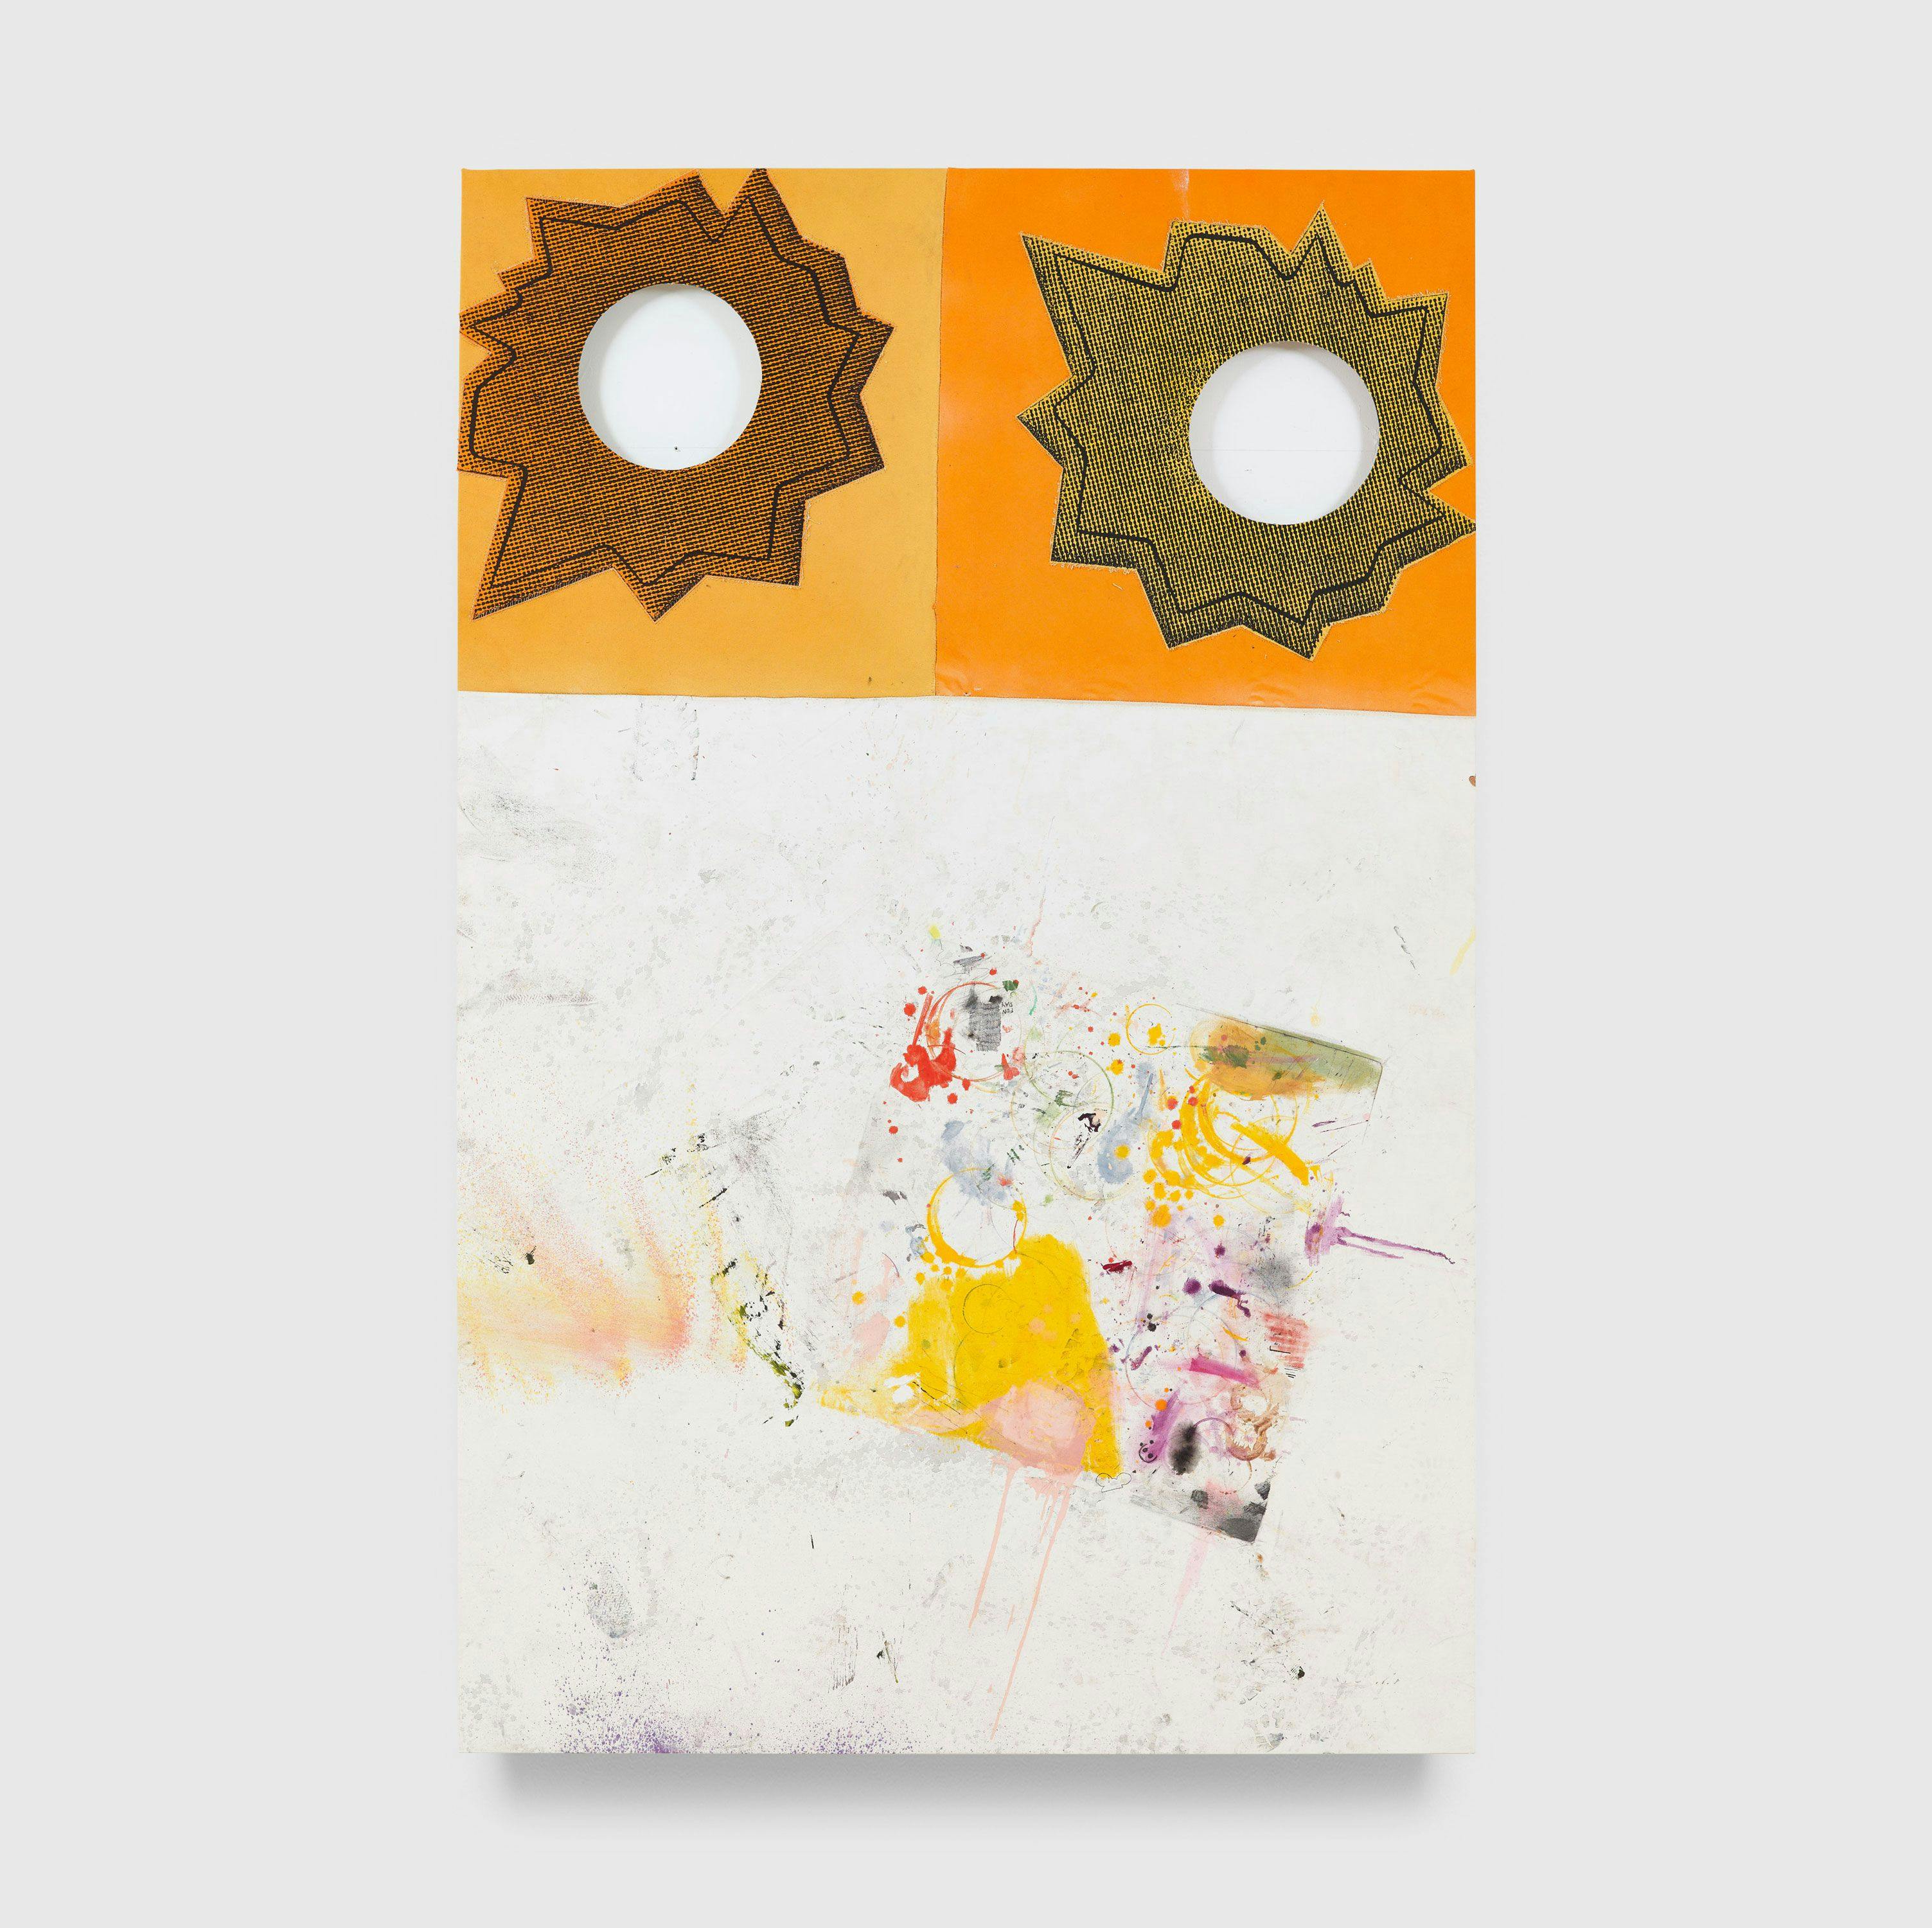 An oil, silkscreen ink, and dental floss on canvas artwork by Nate Lowman, titled Untitled, dated 2013.